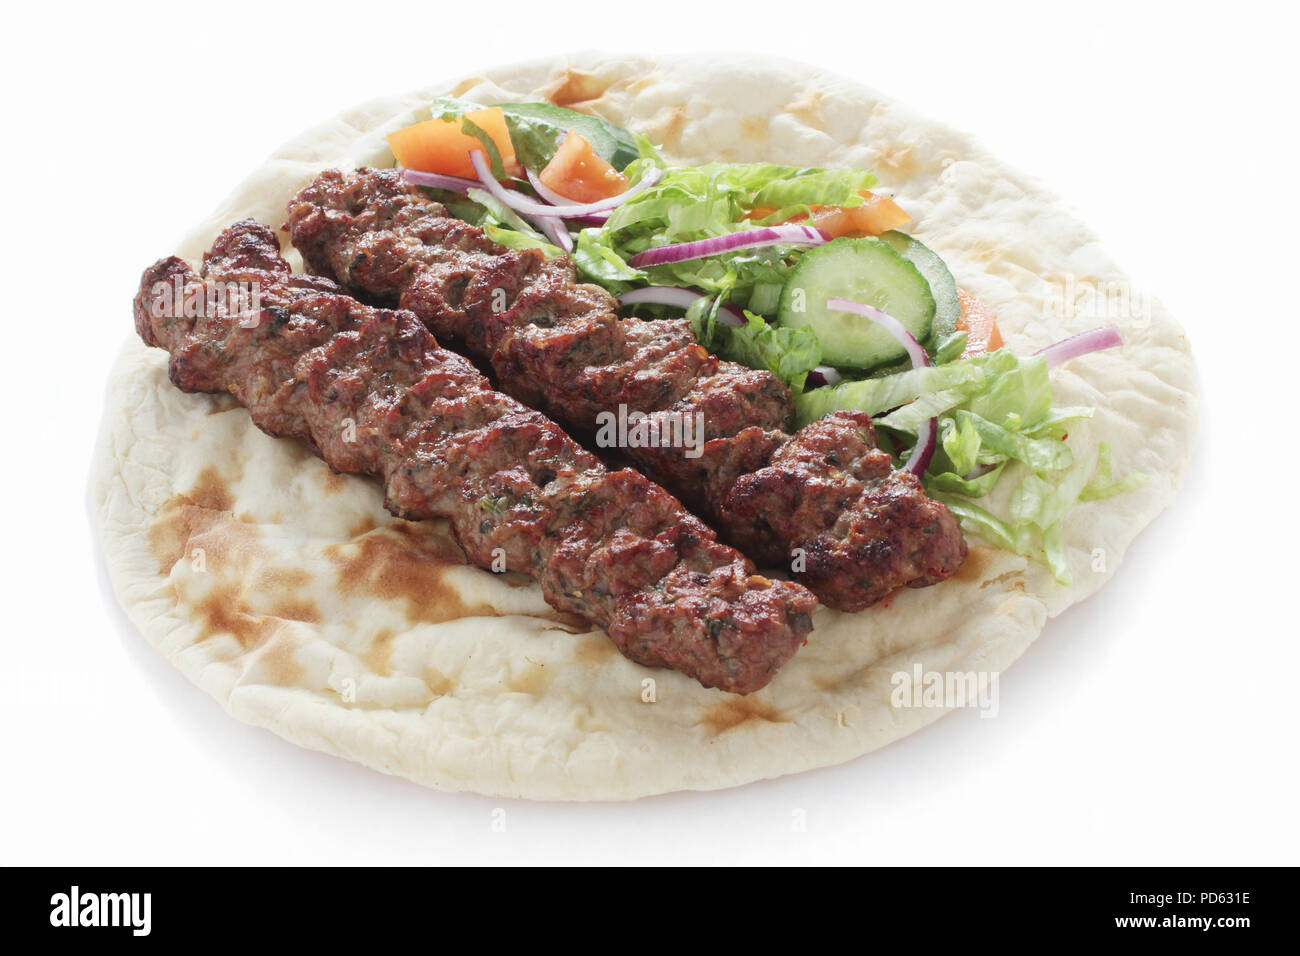 Kofte Kebab Sandwich High Resolution Stock Photography and Images - Alamy